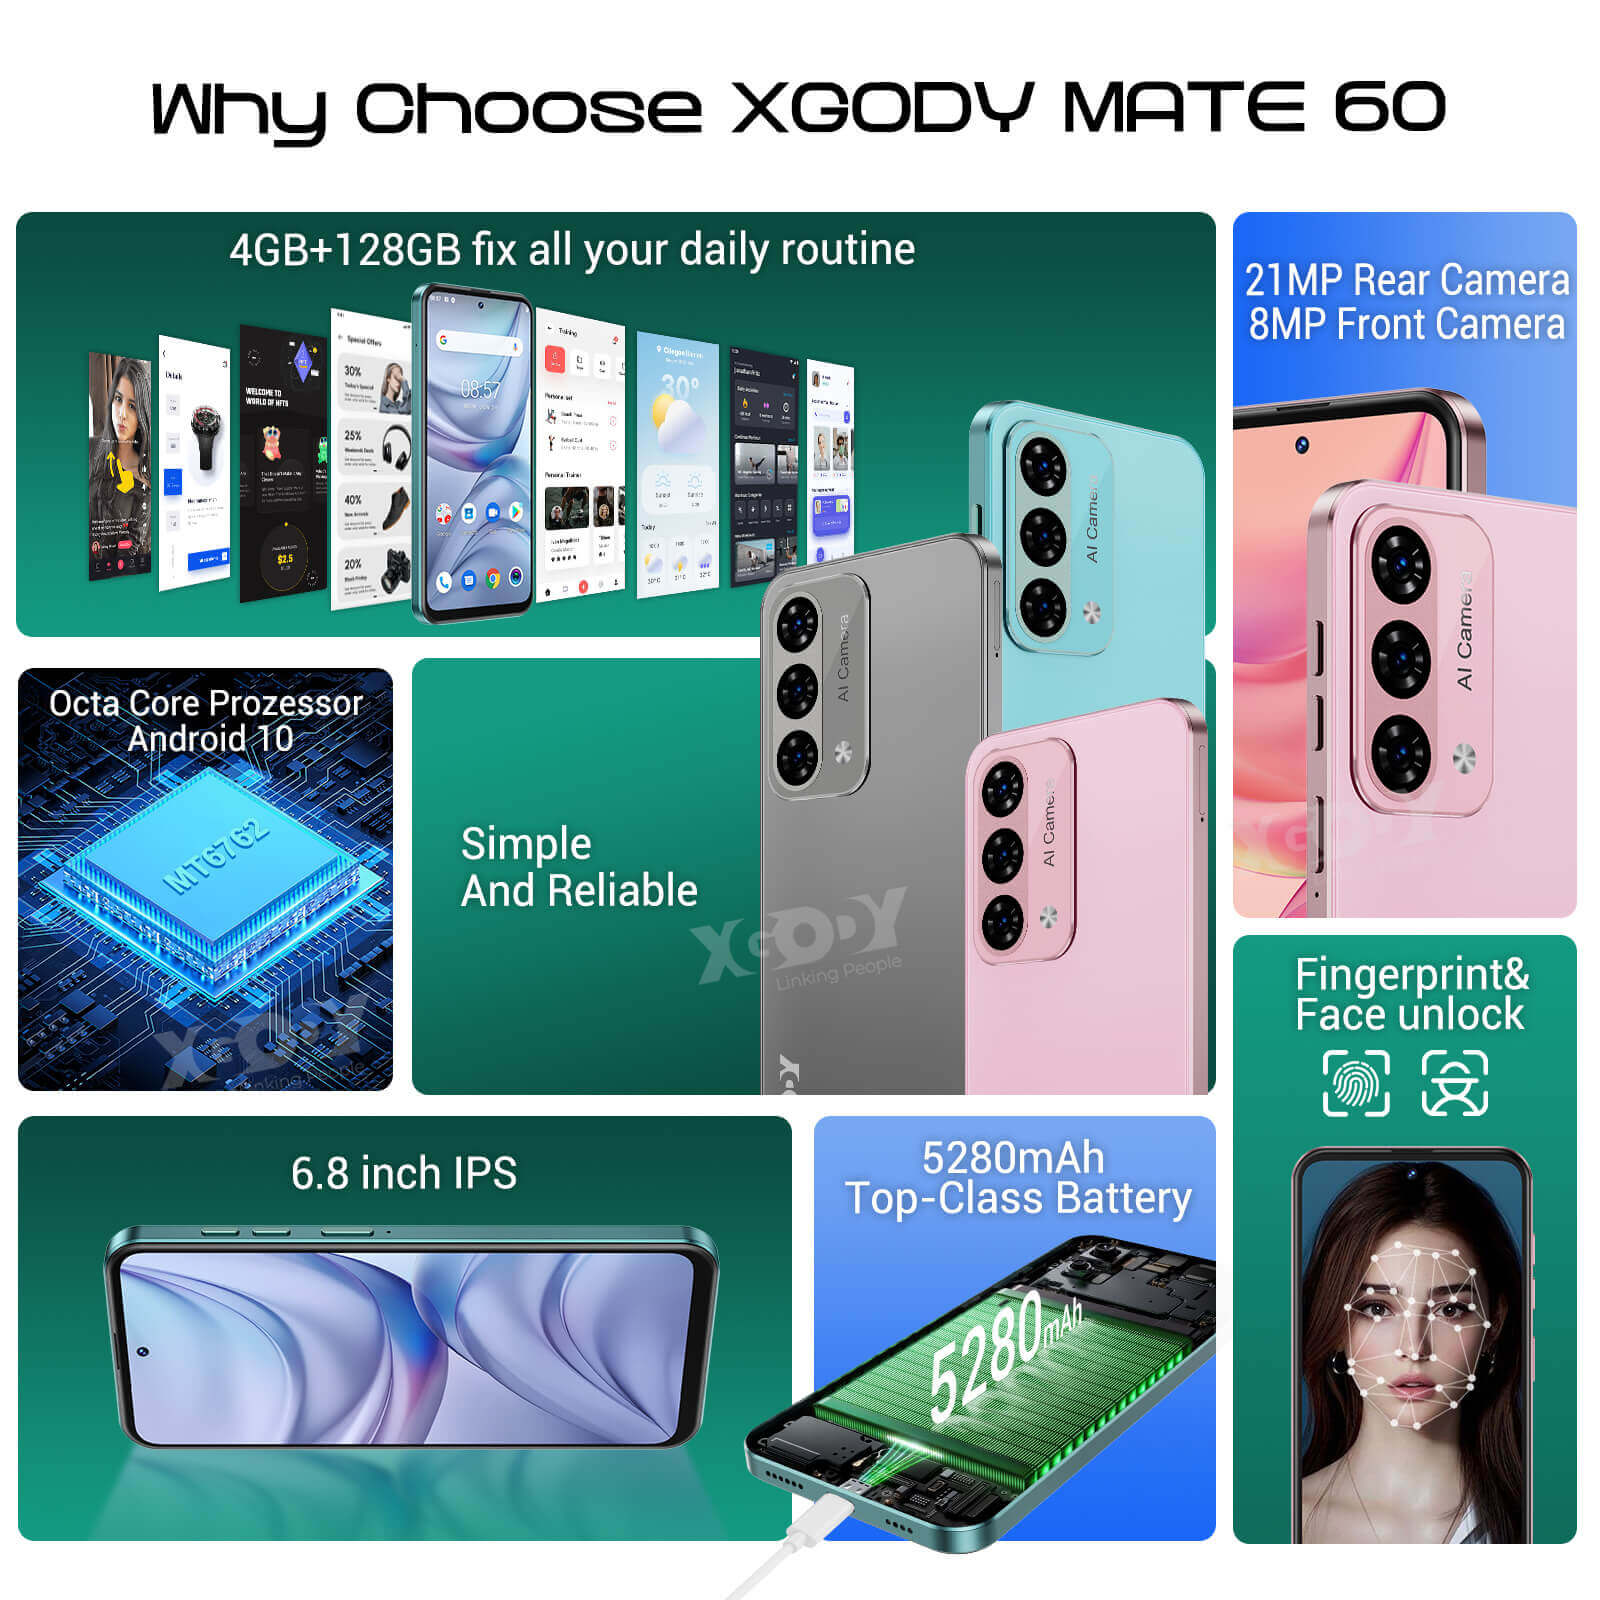 XGODY Mate60 6.79" Large Screen 4G LTE Smartphone, Supports Sace Unlocking, Built-in 4+128G Memory